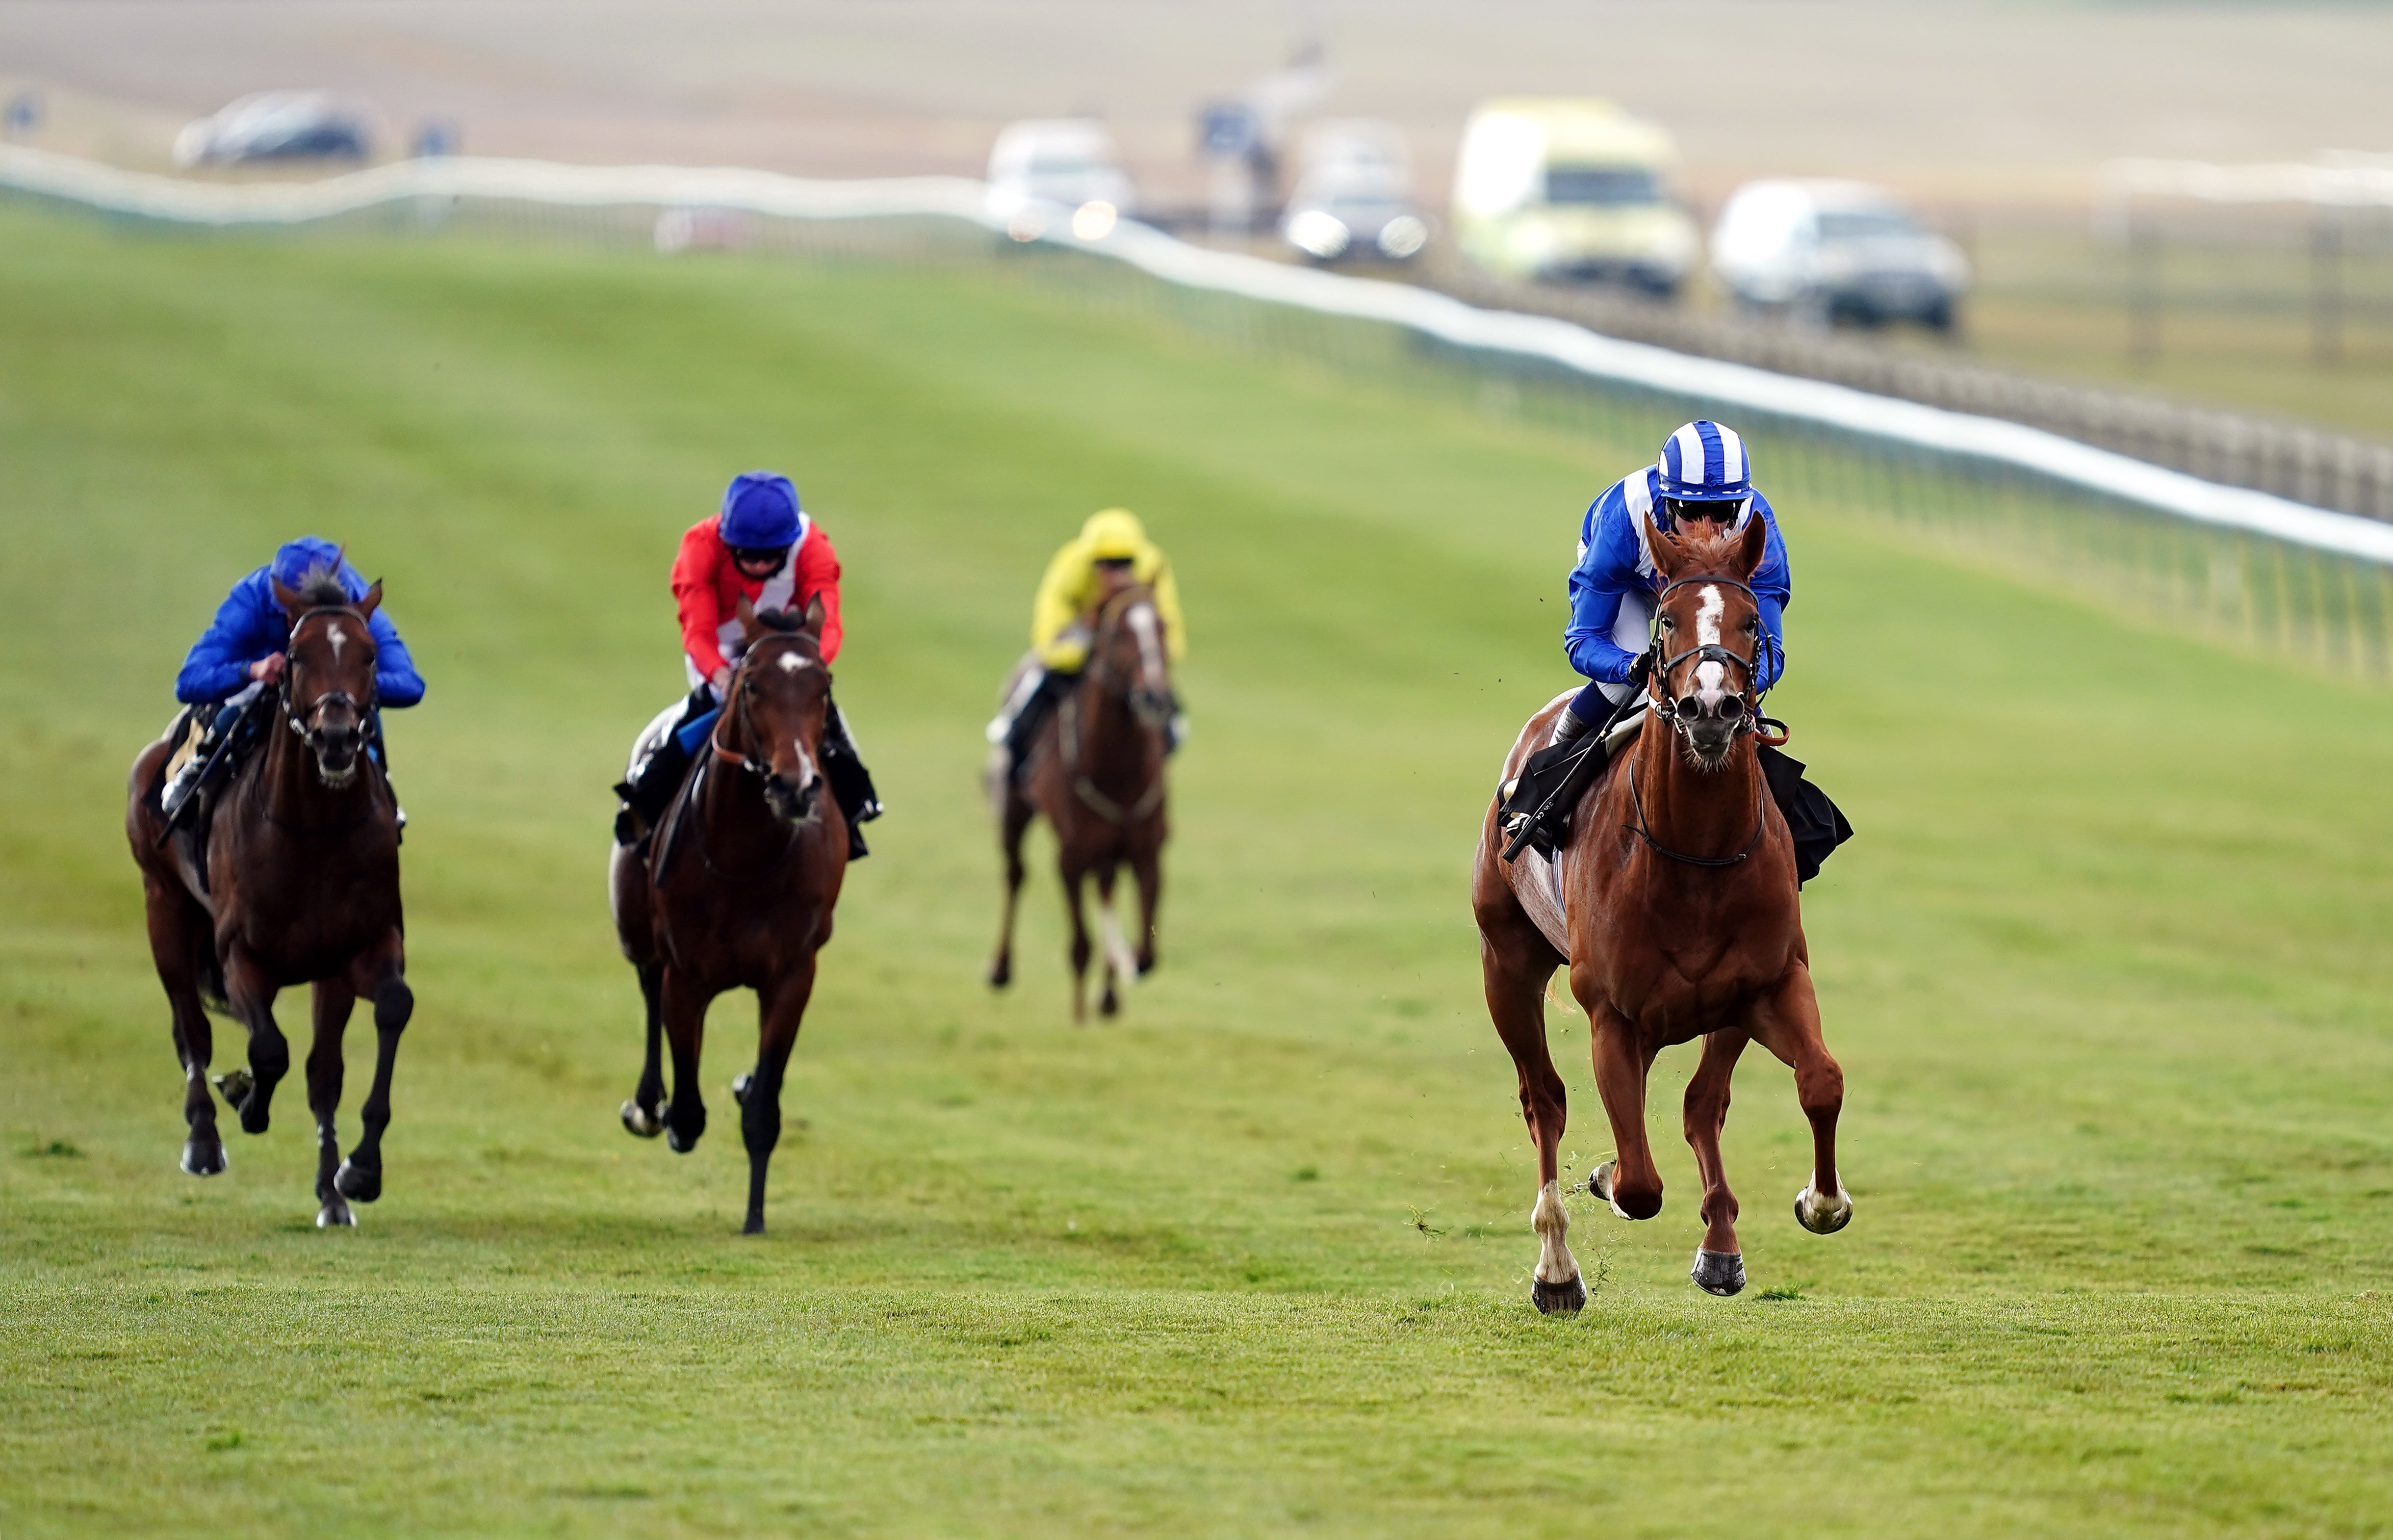 Mohaafeth had another trip to Newmarket on Wednesday having won there twice easily this season